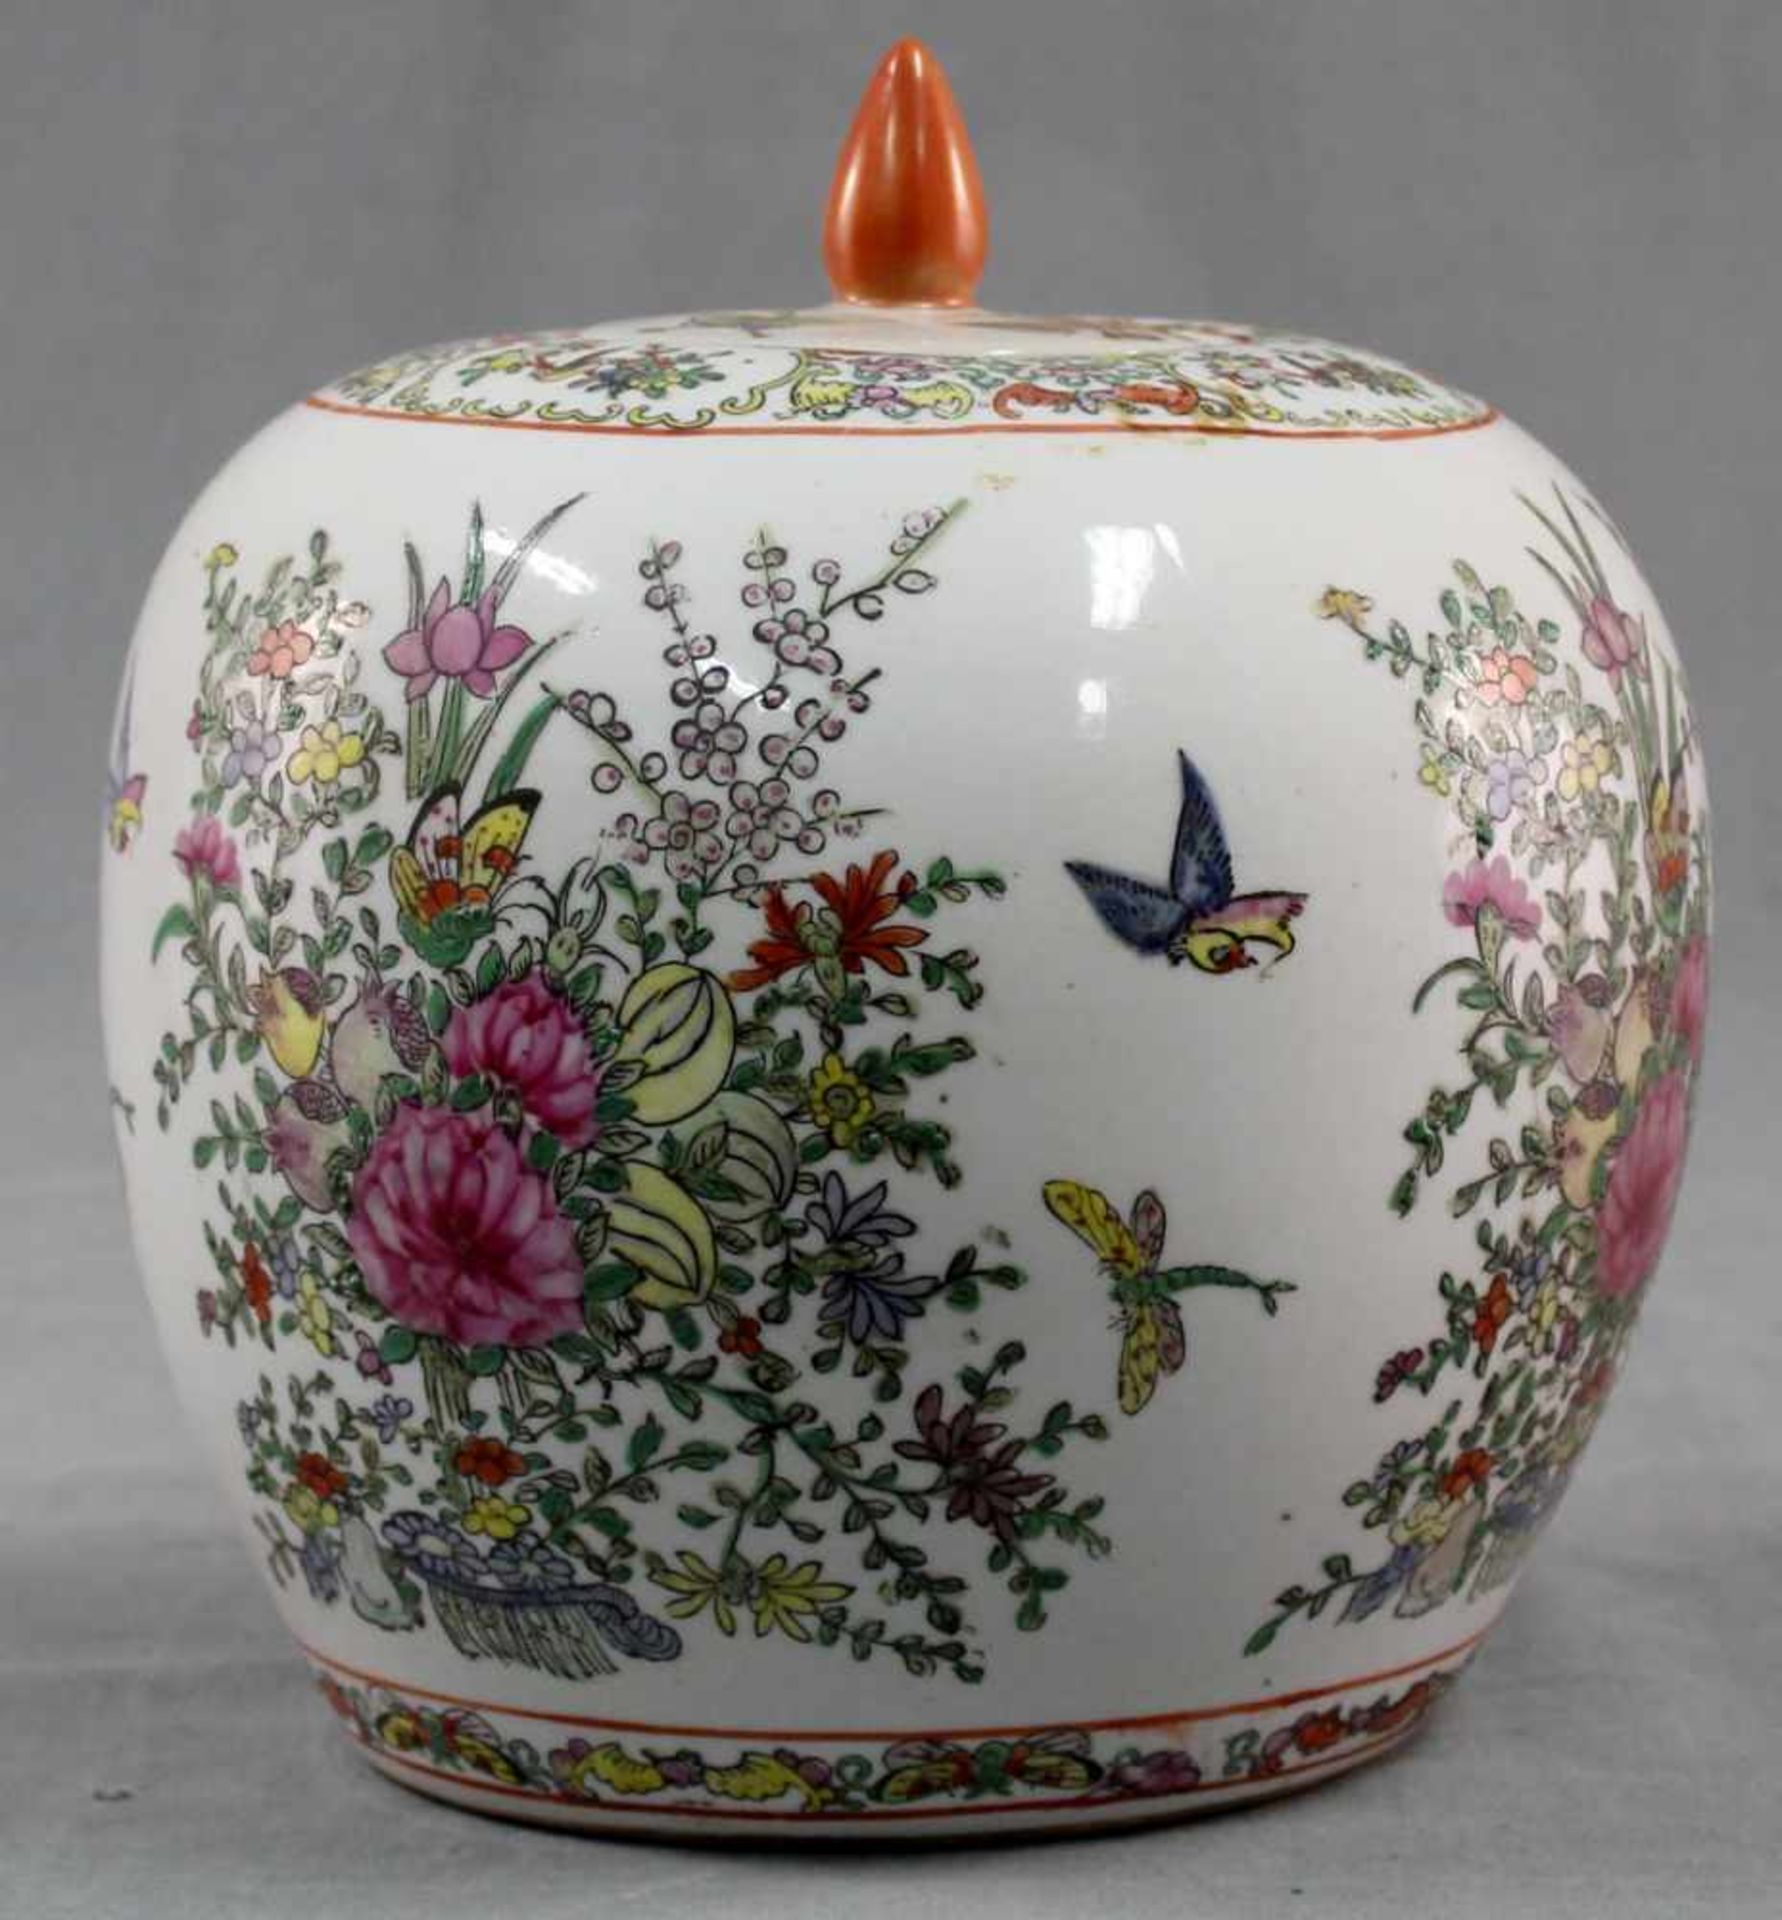 Ginger pot with lid. Porcelain. Proably China old. - Image 2 of 5